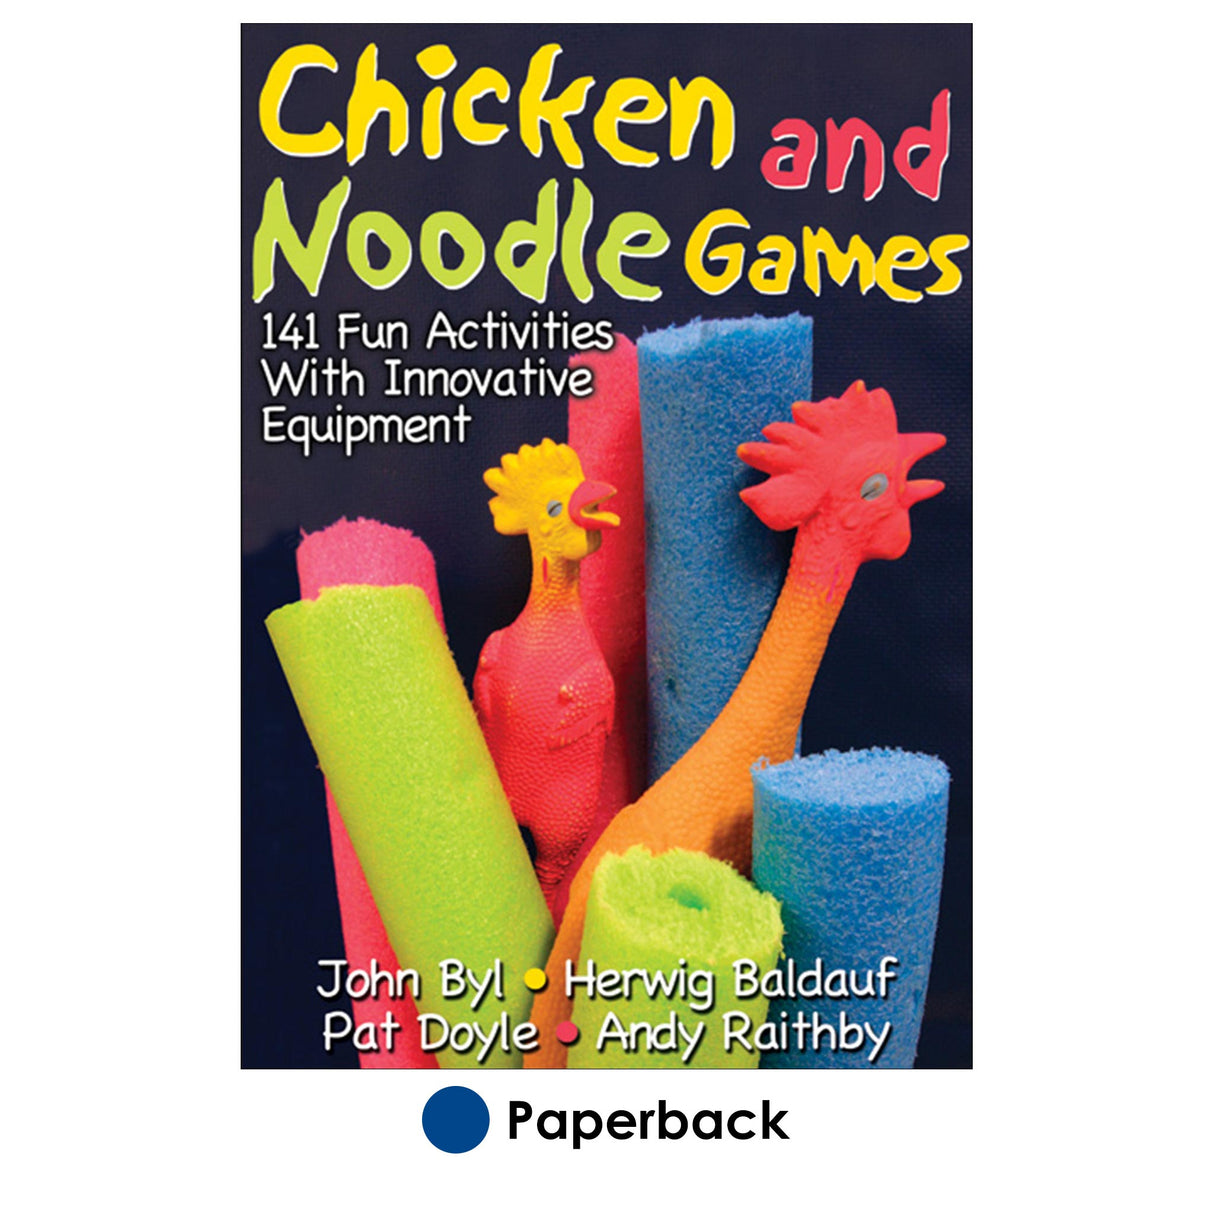 Chicken and Noodle Games